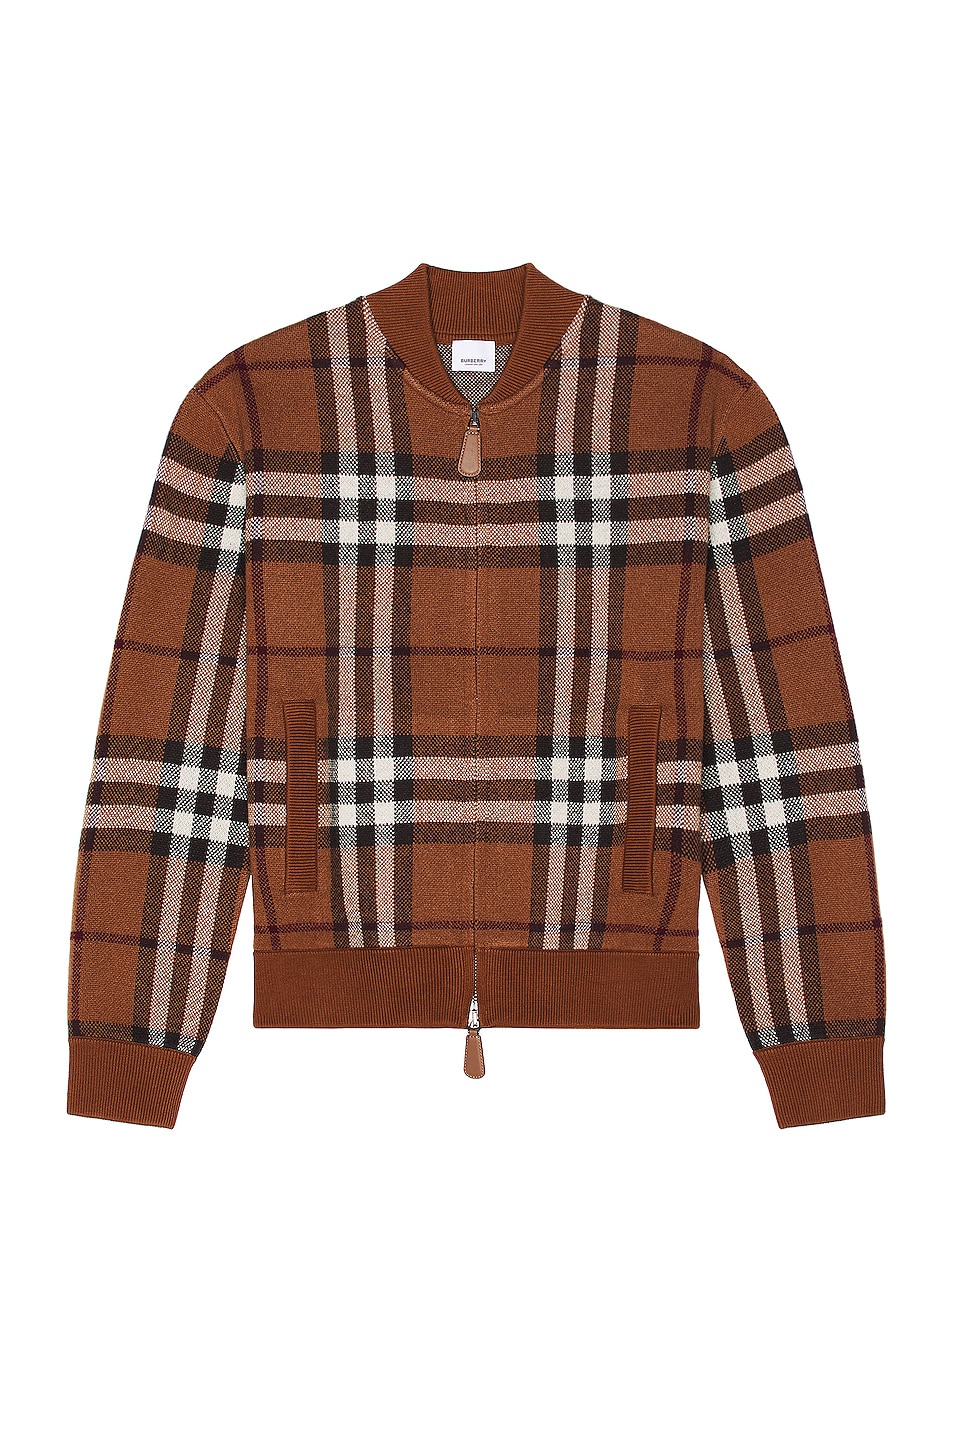 Image 1 of Burberry Maltby Check Jacket in Dark Birch Brown